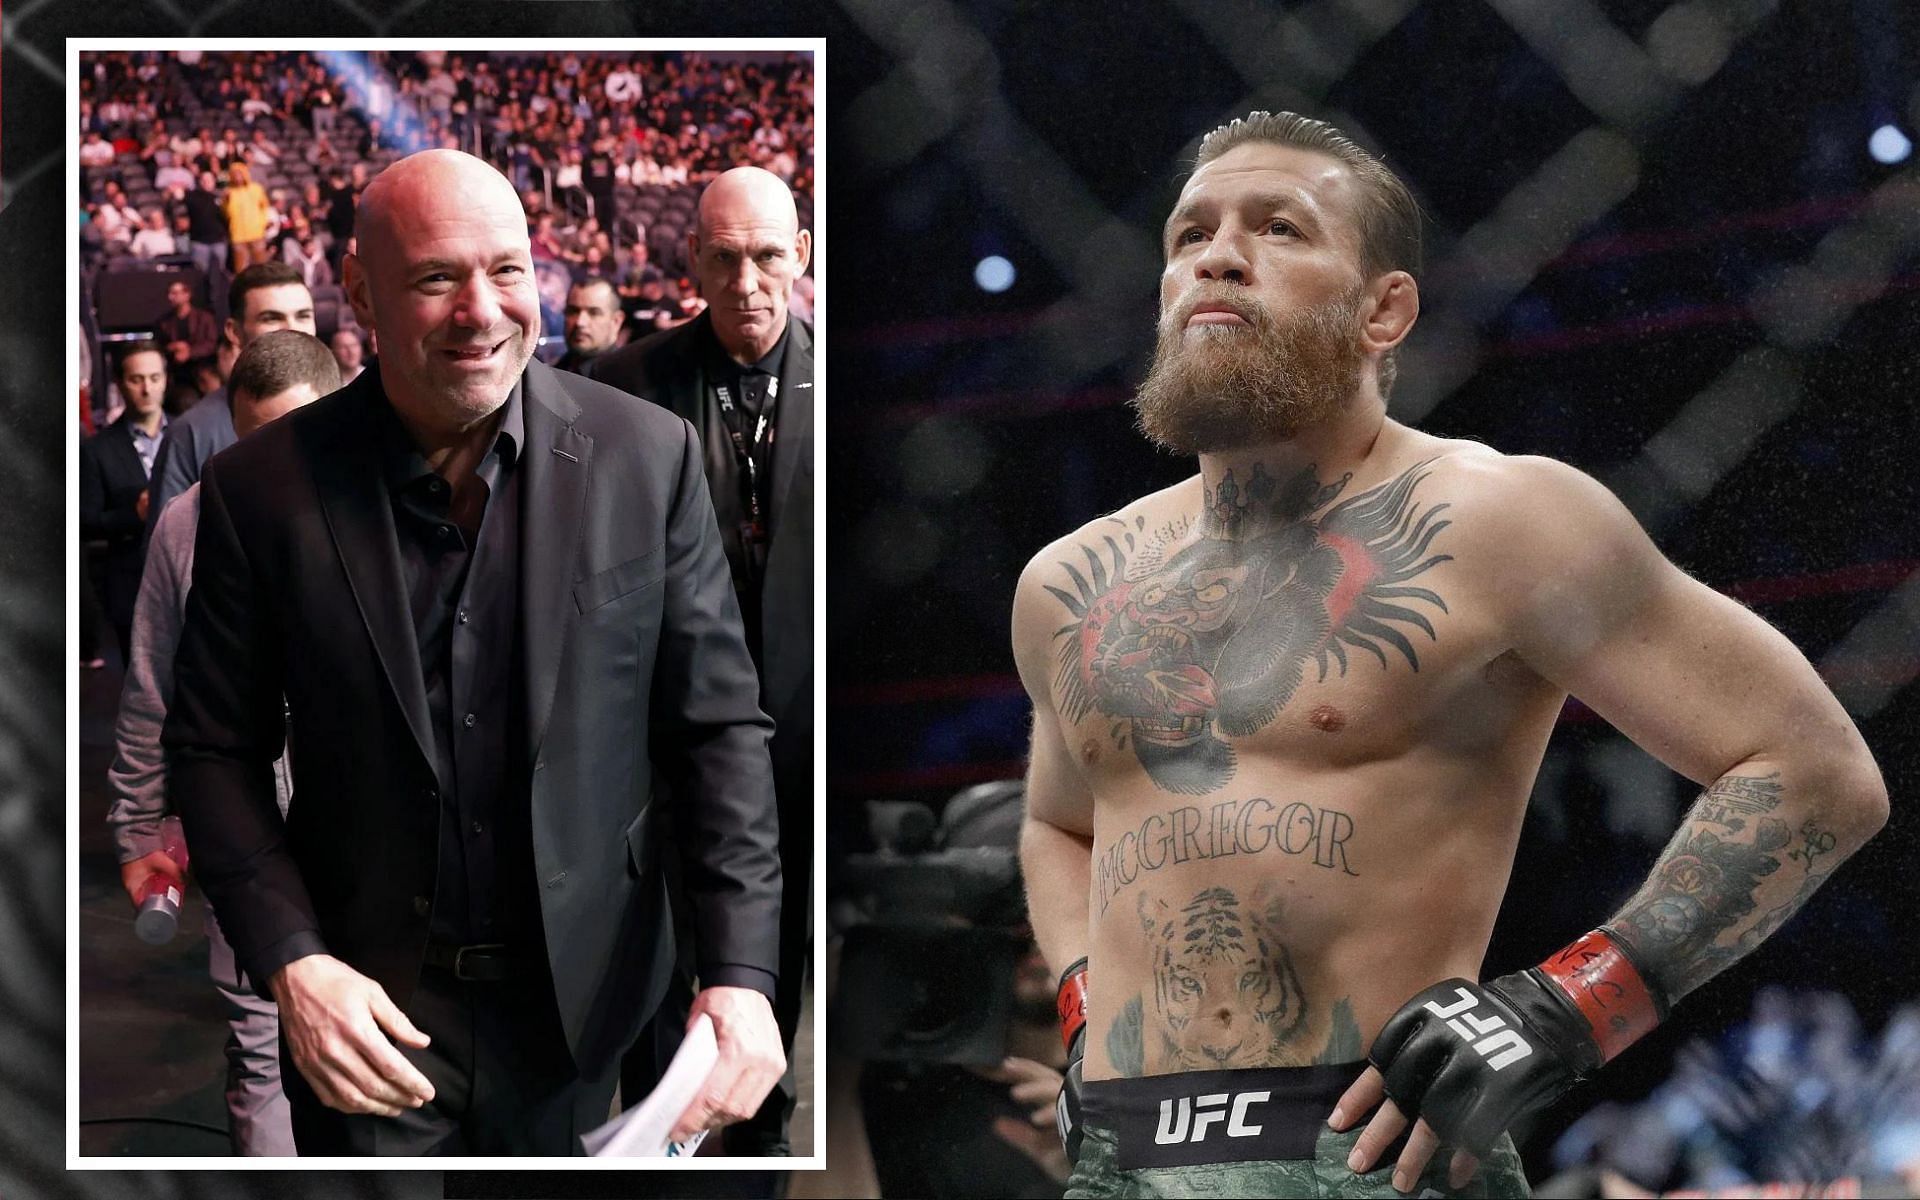 Dana White addresses rumors of contract re-negotiations, following Conor McGregor